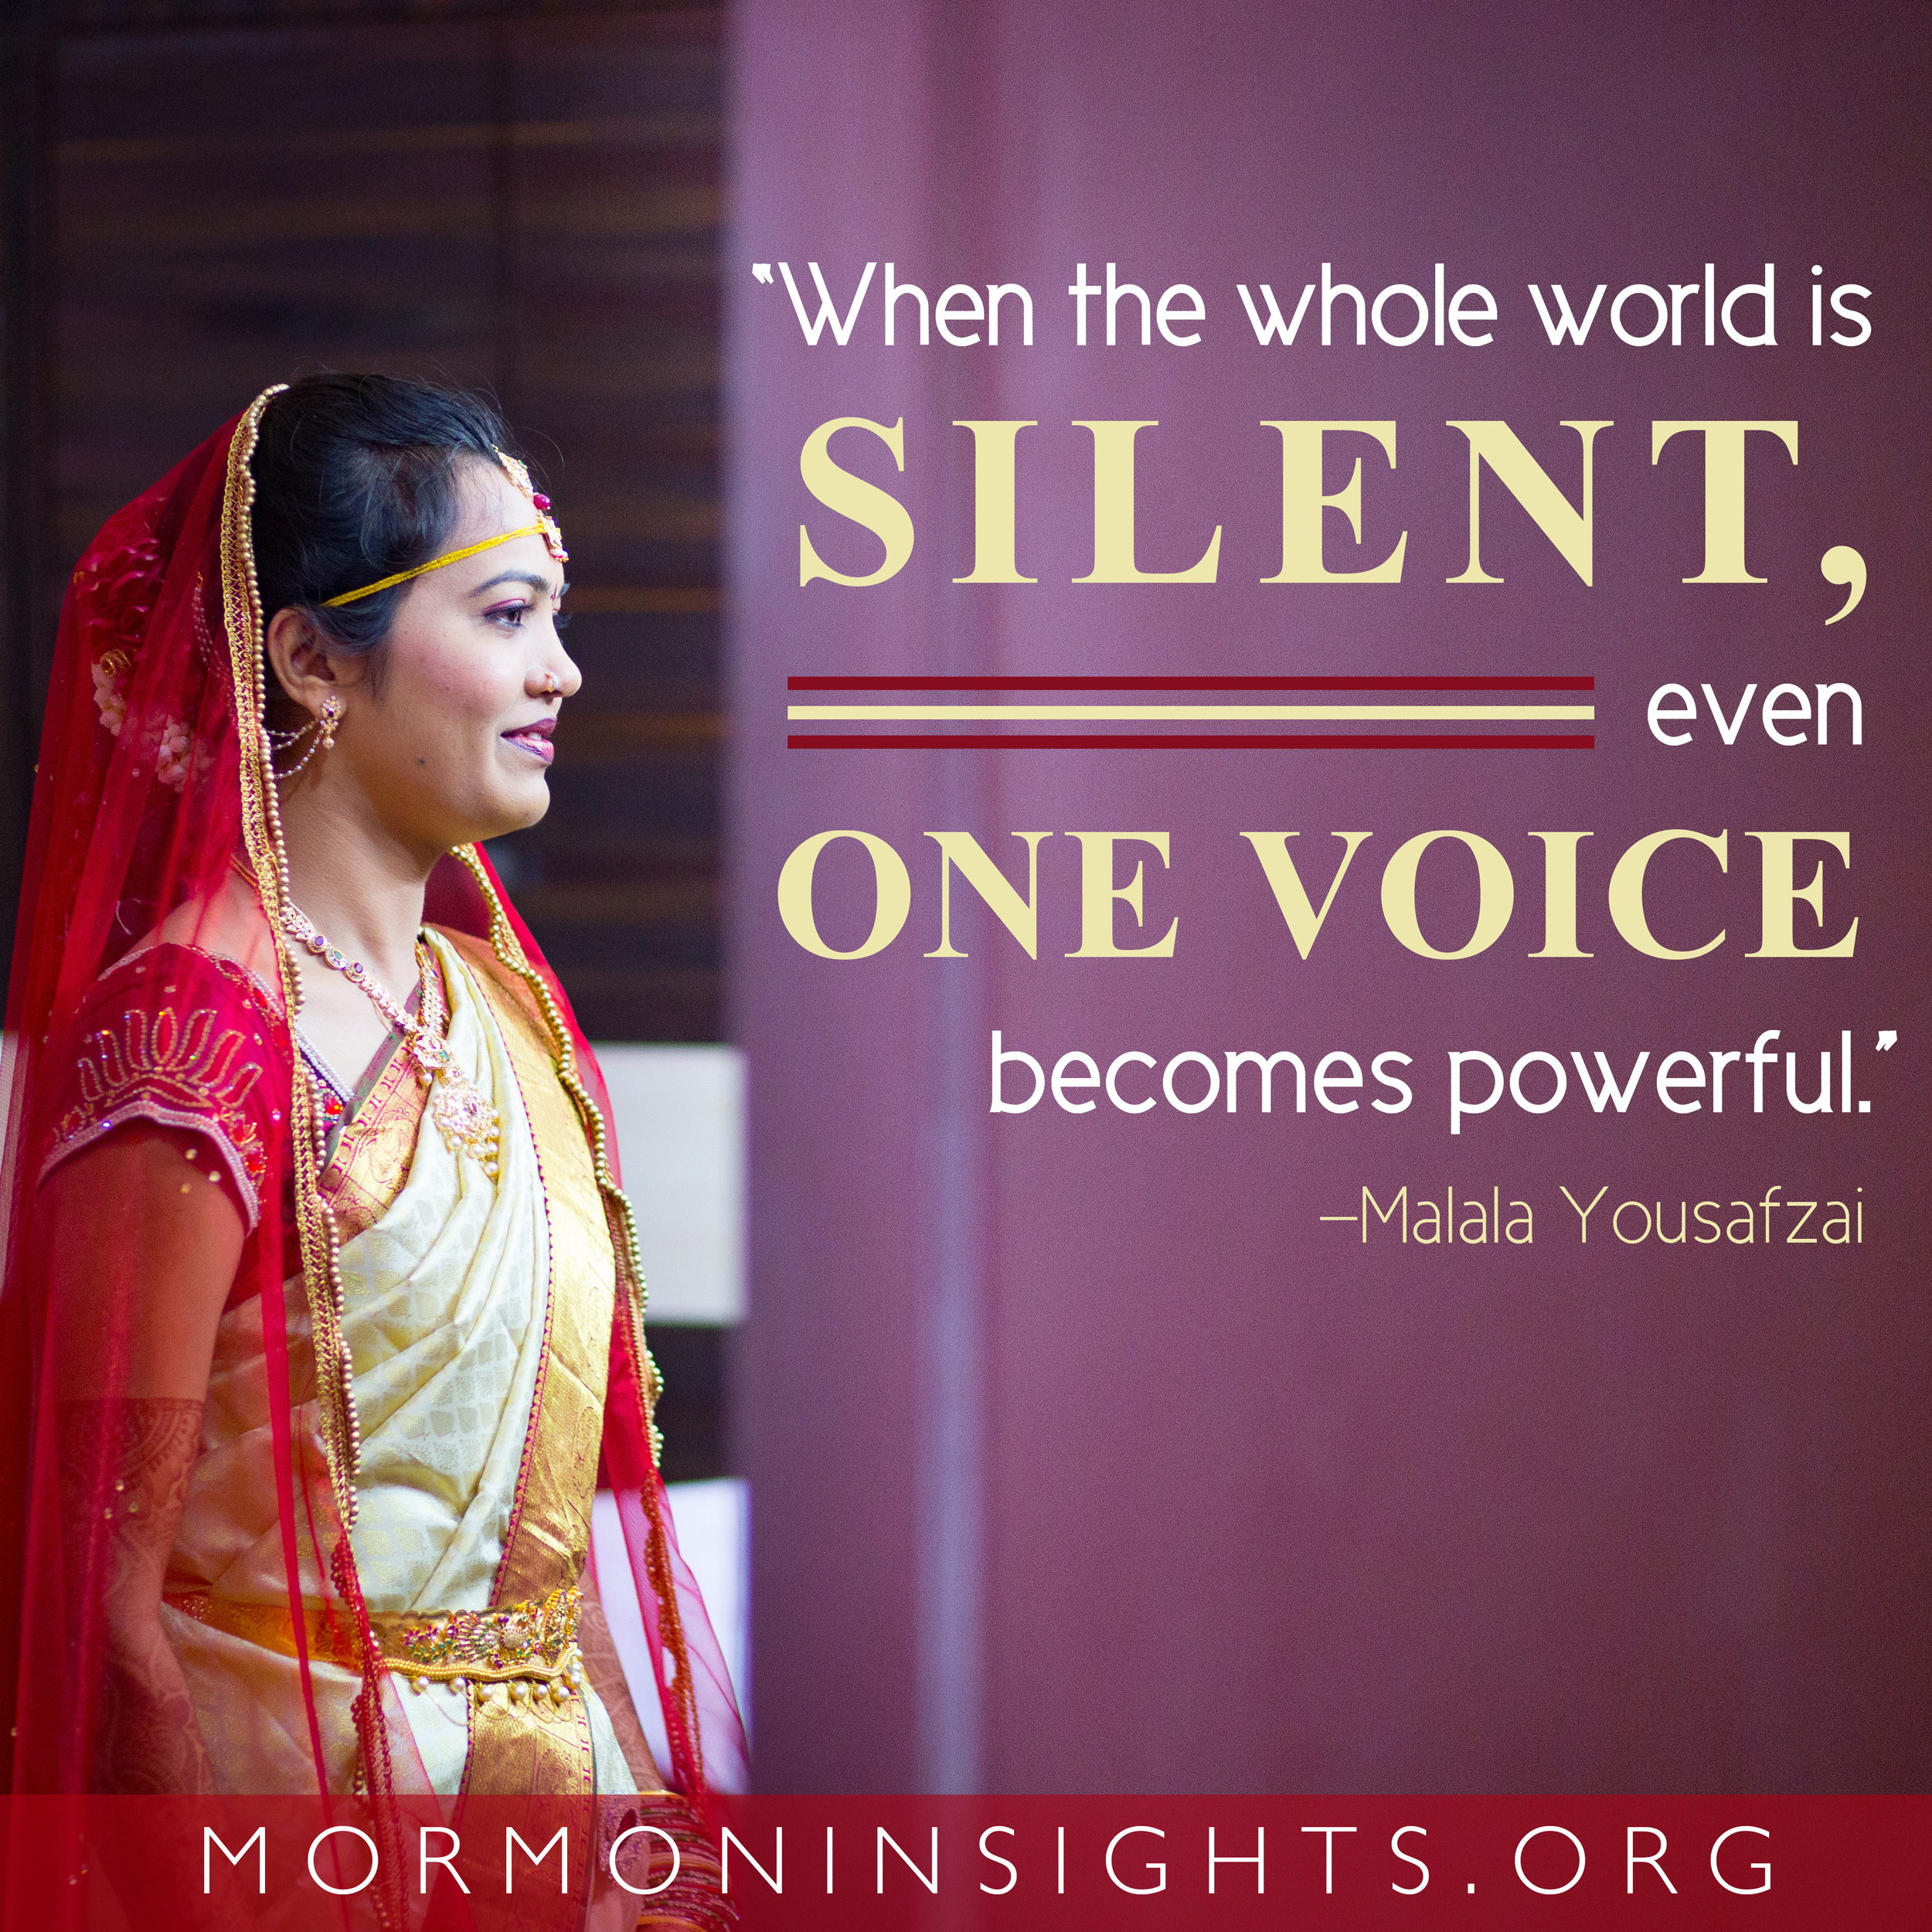 "When the whole world is silent, even one voice becomes powerful." -Malala Yousafzai